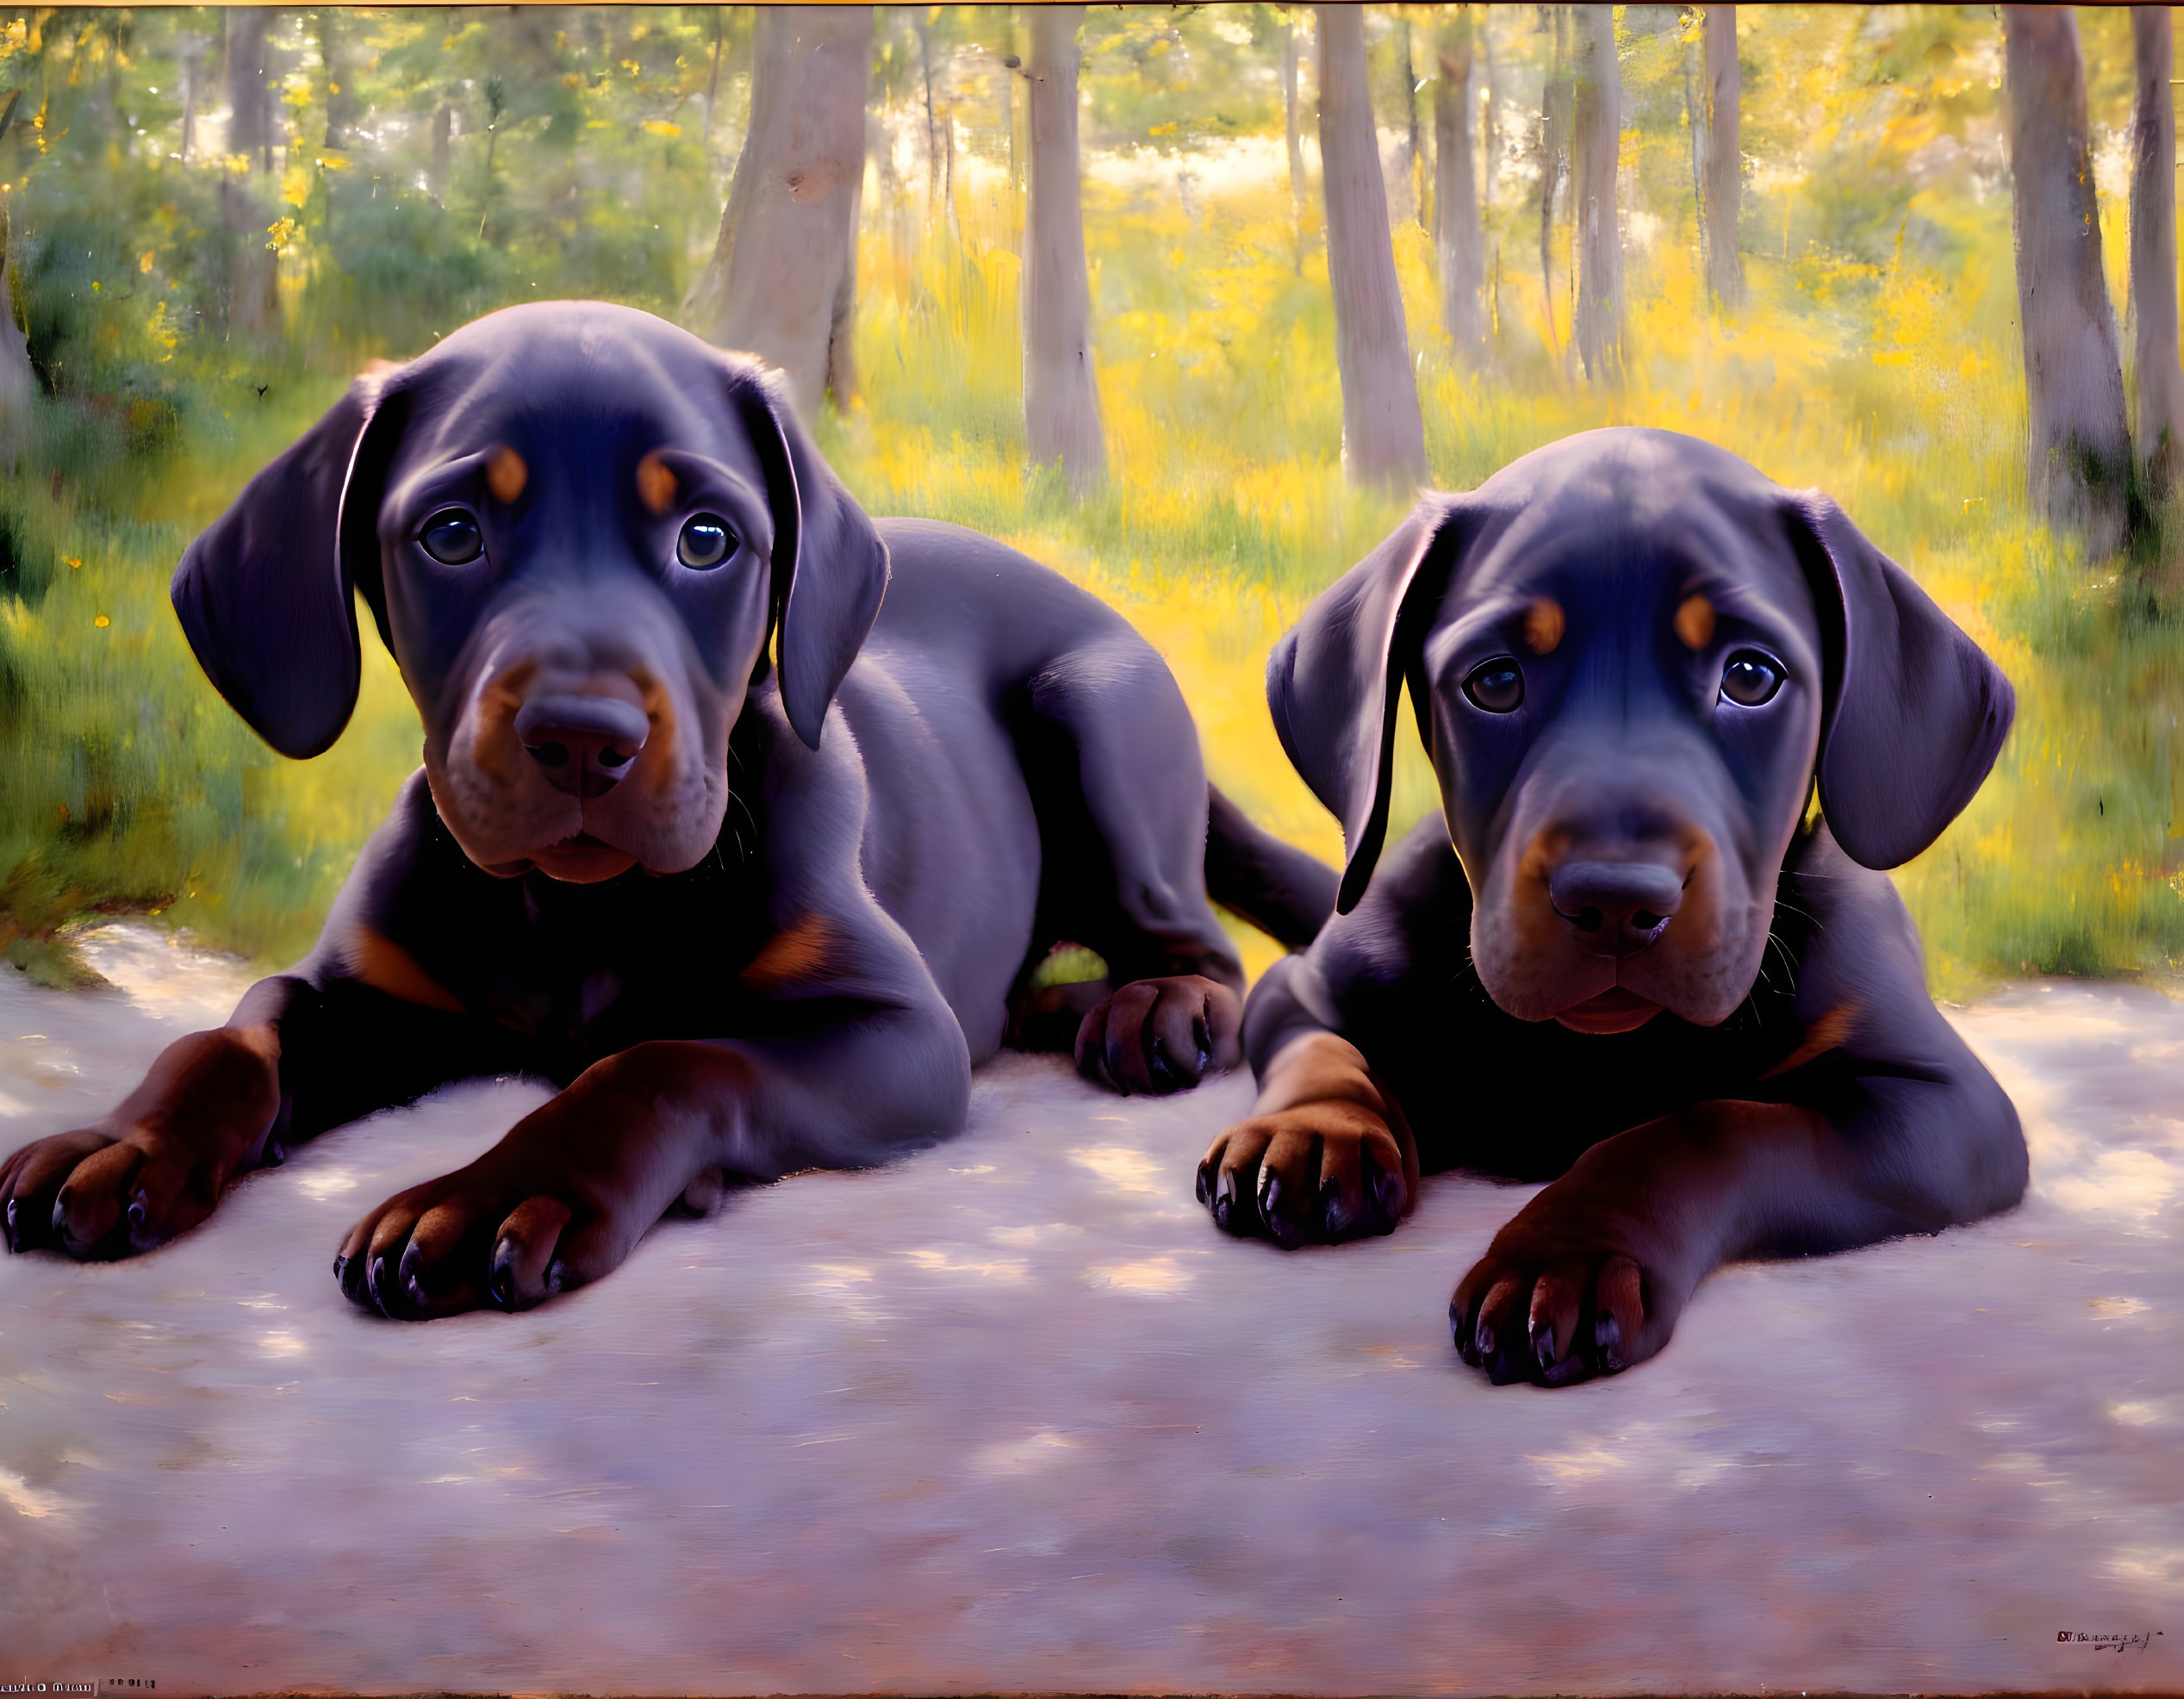 Two black puppies with bright eyes resting on ground with sunny, wooded backdrop